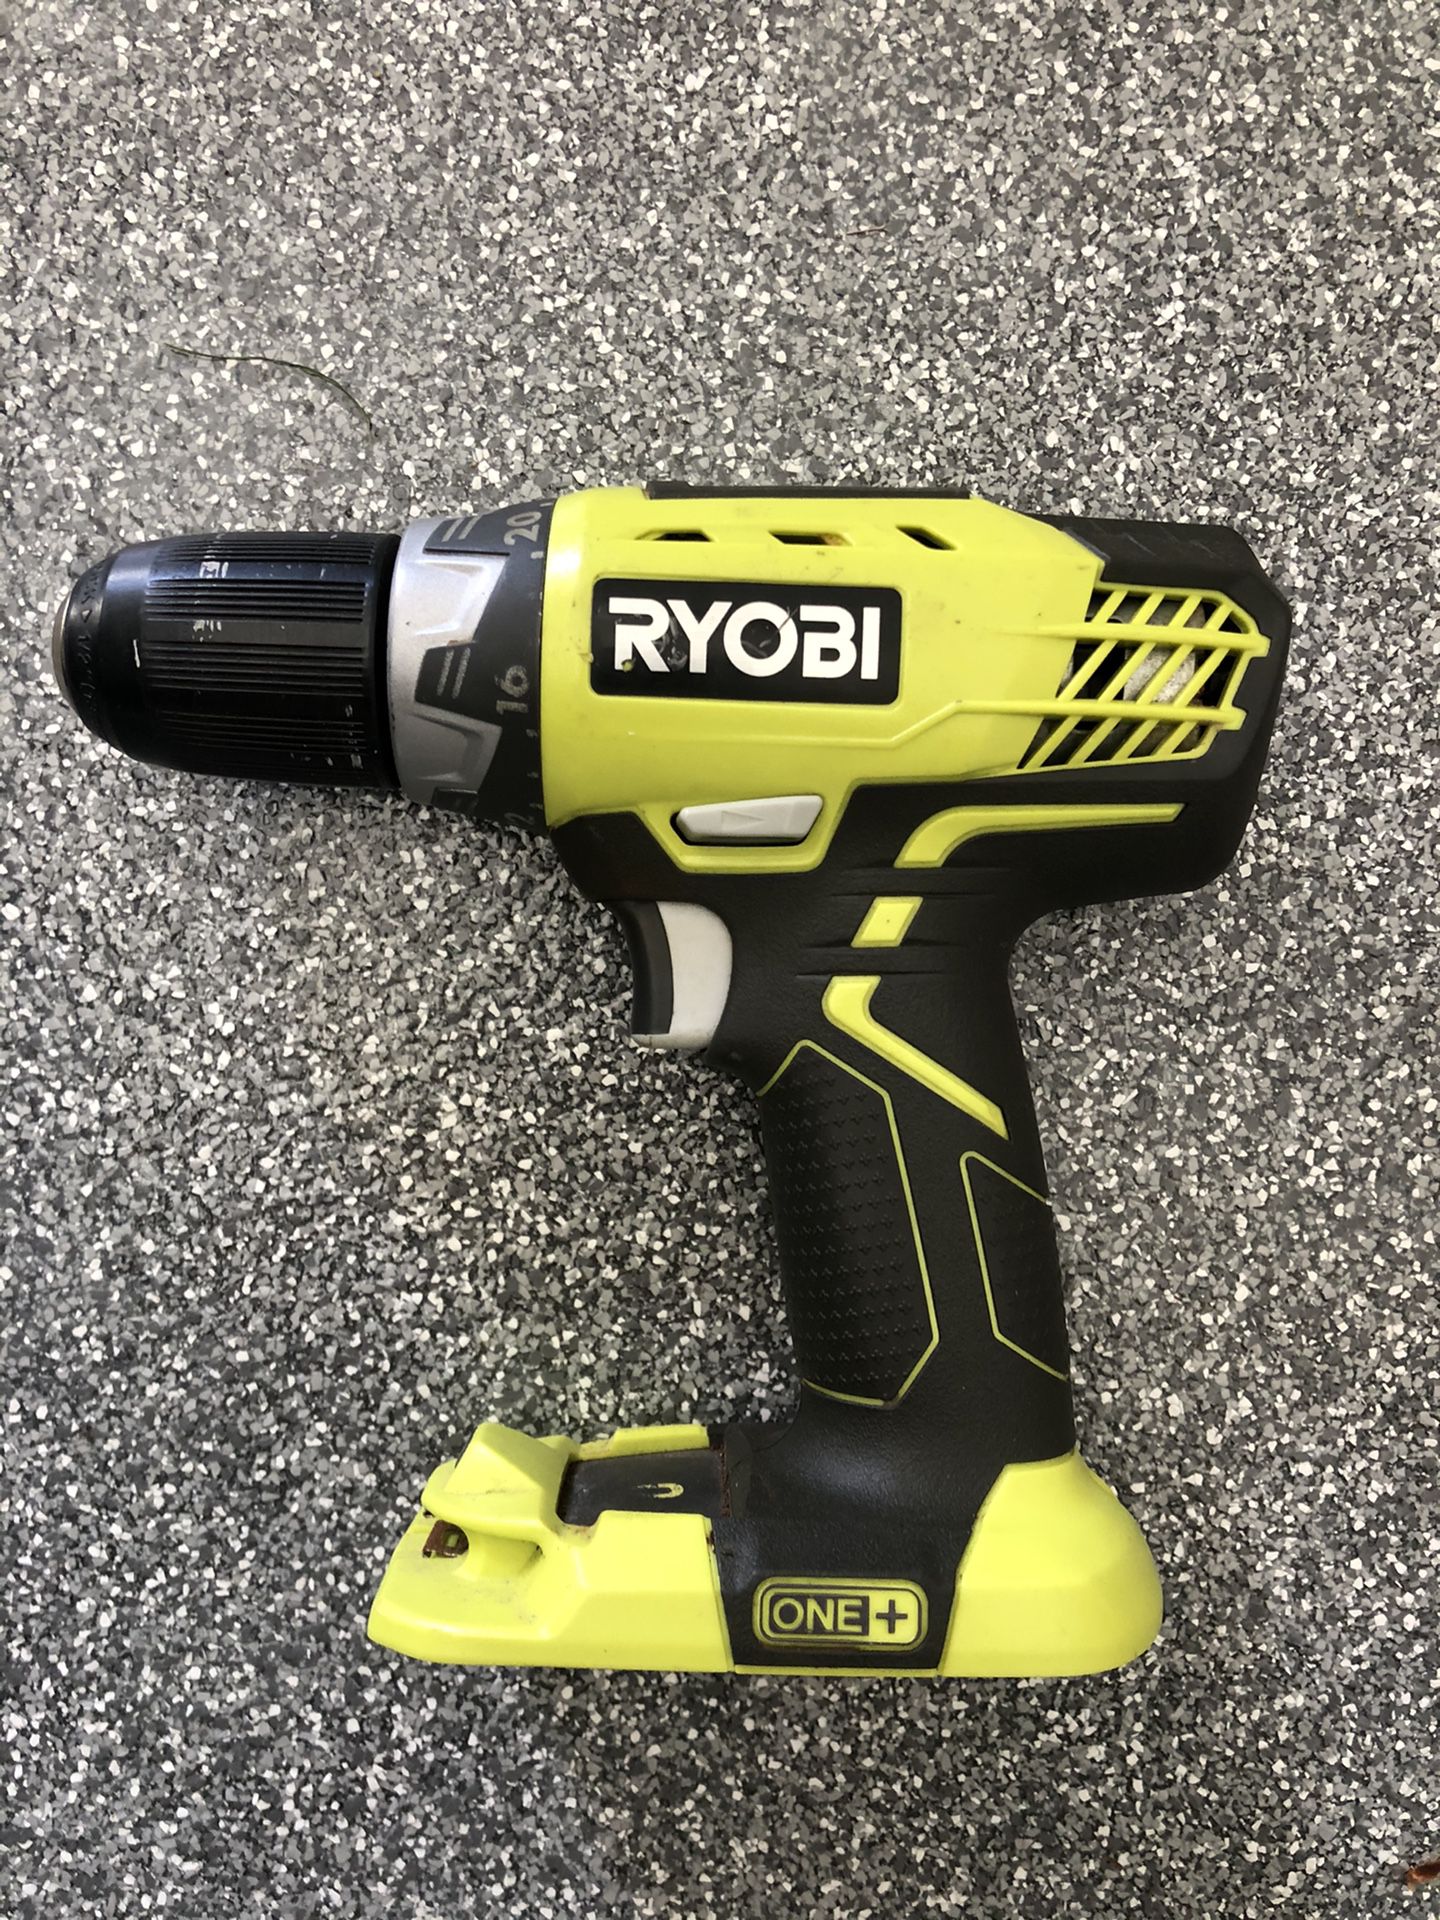 Ryobi 18v drill driver and 2 chargers